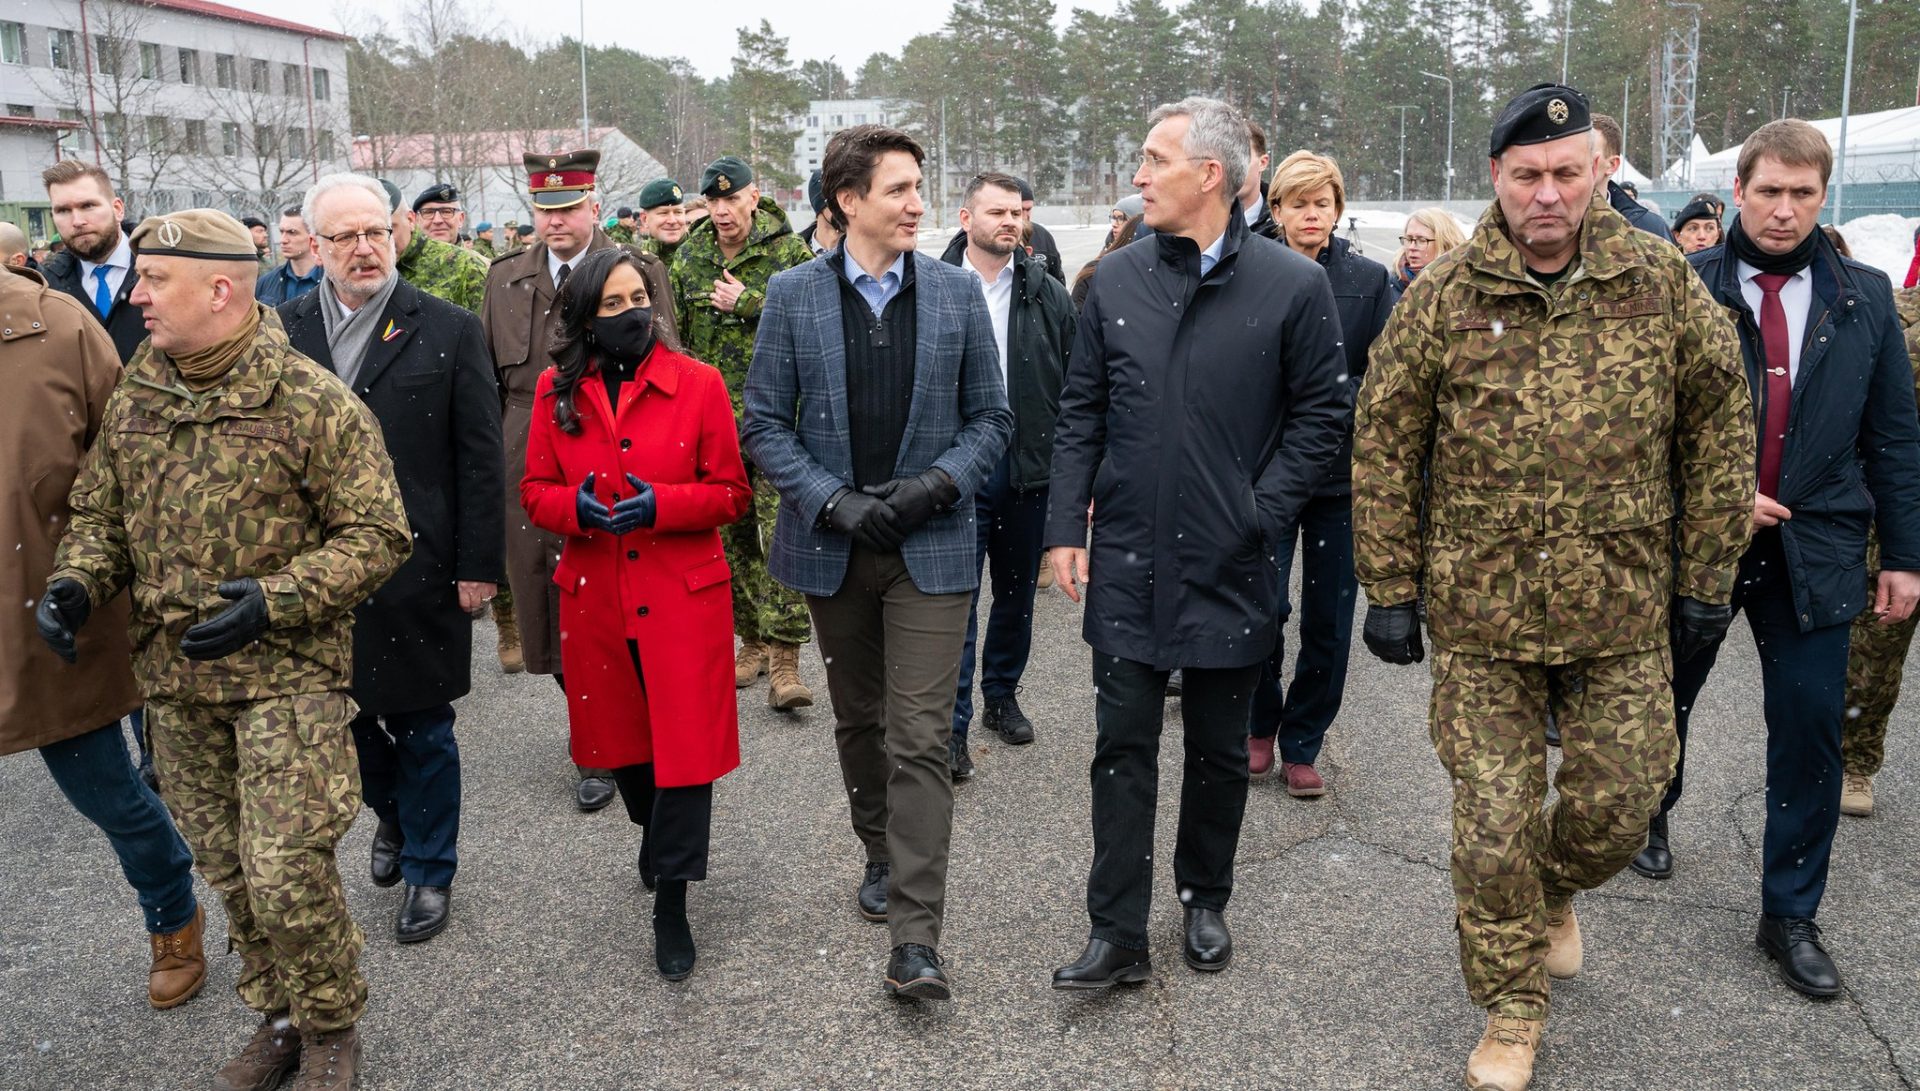 NATO Secretary General Jens Stoltenberg at Ādaži Military Base together with the President of Latvia, Egils Levits, the Minister of Defence of Canada, Anita Anand and the Prime Minister of Canada, Justin Trudeau. March 8, 2022
NATO/Flickr